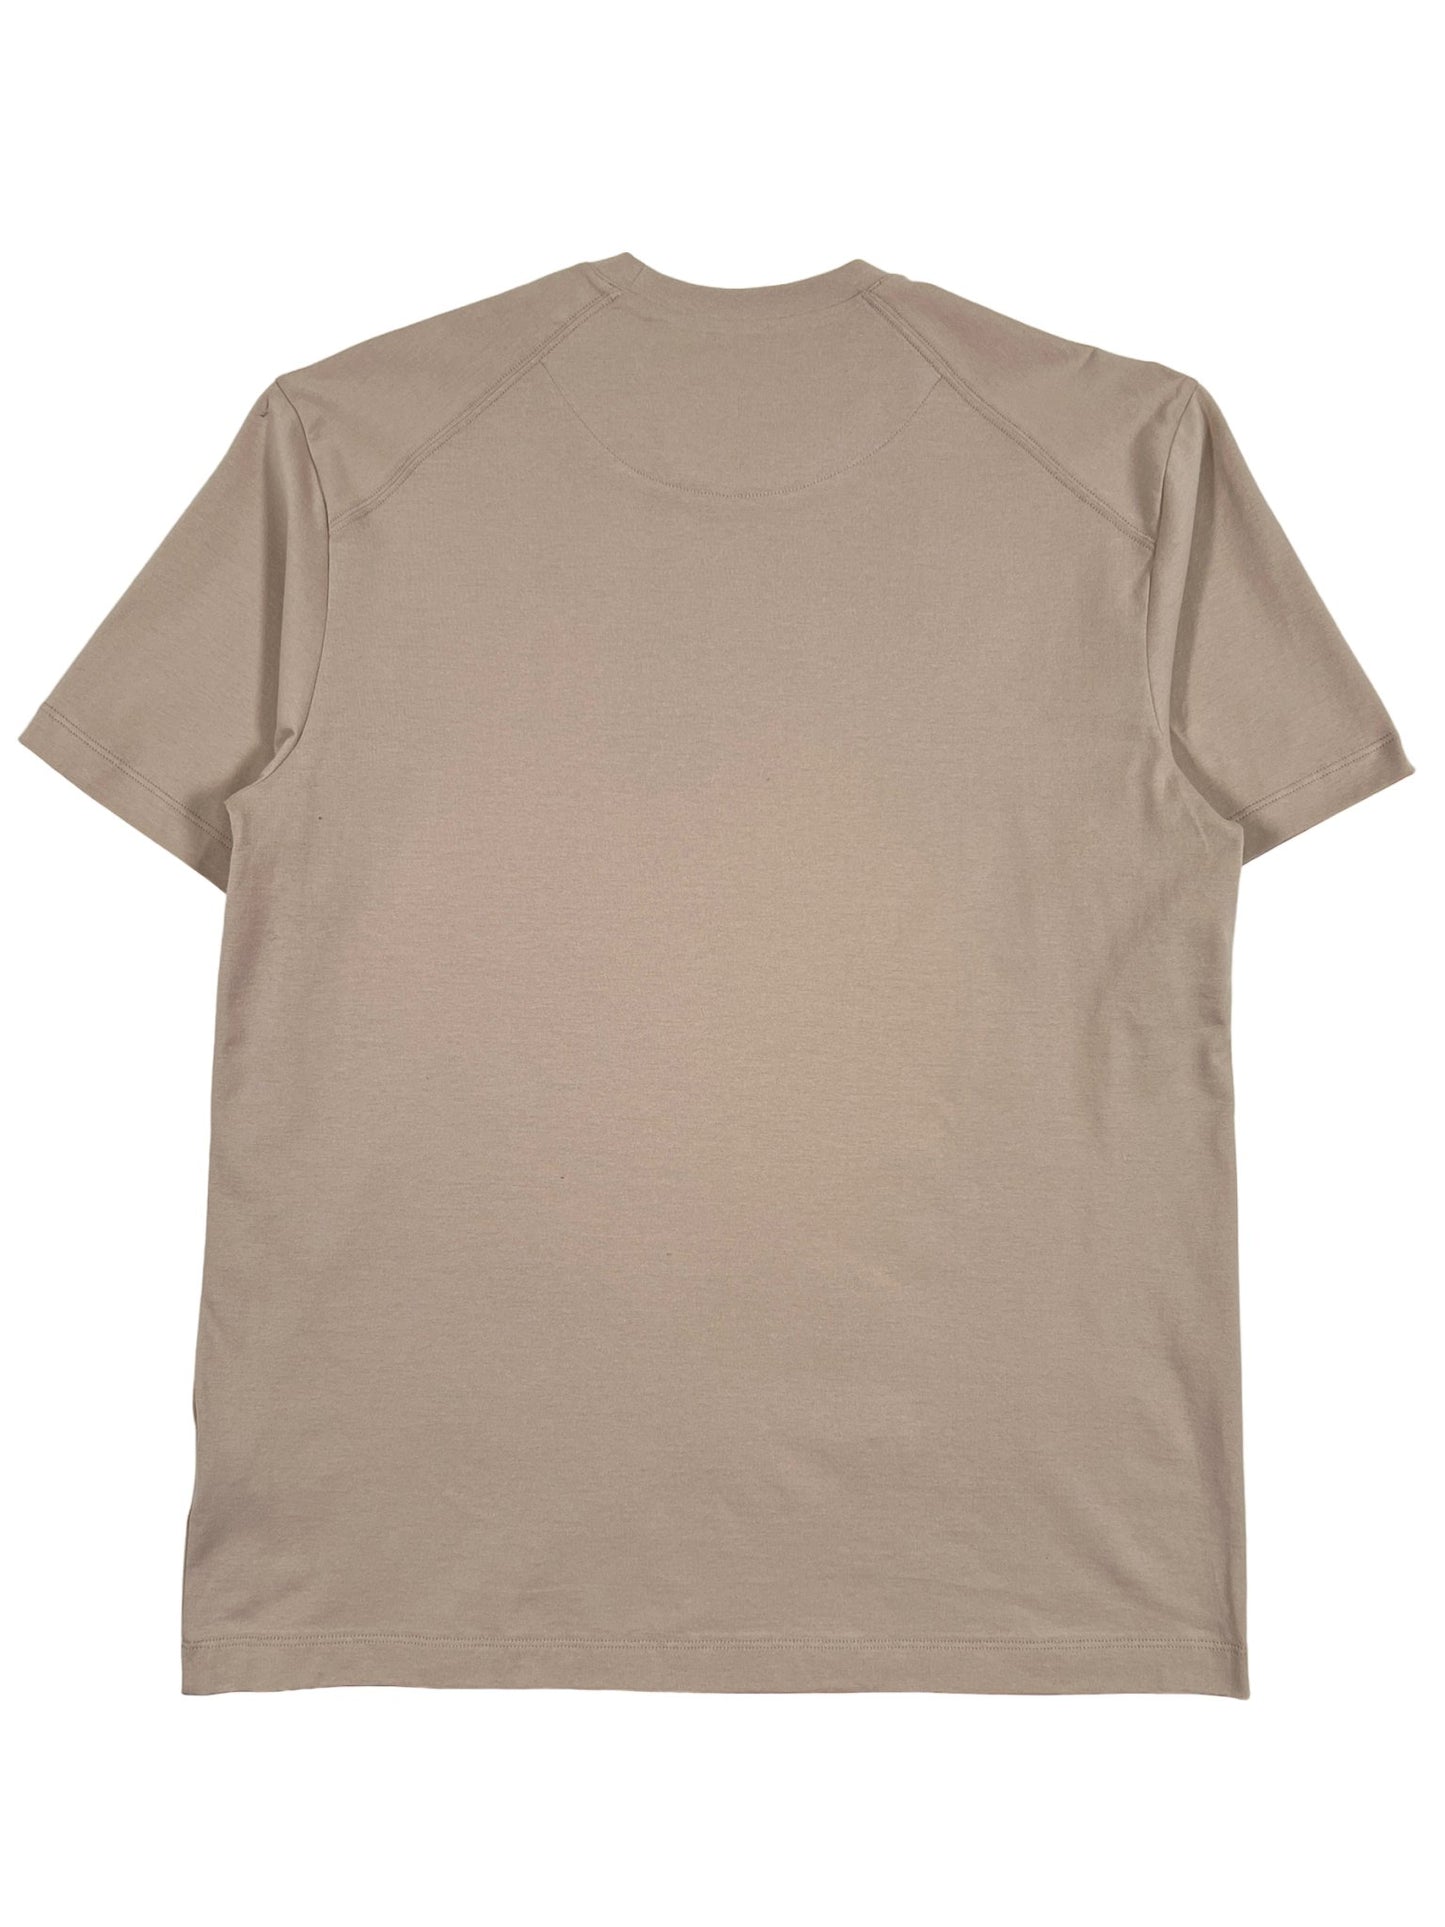 Probus Y-3 IV8223 RELAXED SS TEE CLABRO Y-3 IV8223 RELAXED SS TEE CLABRO BEIGE